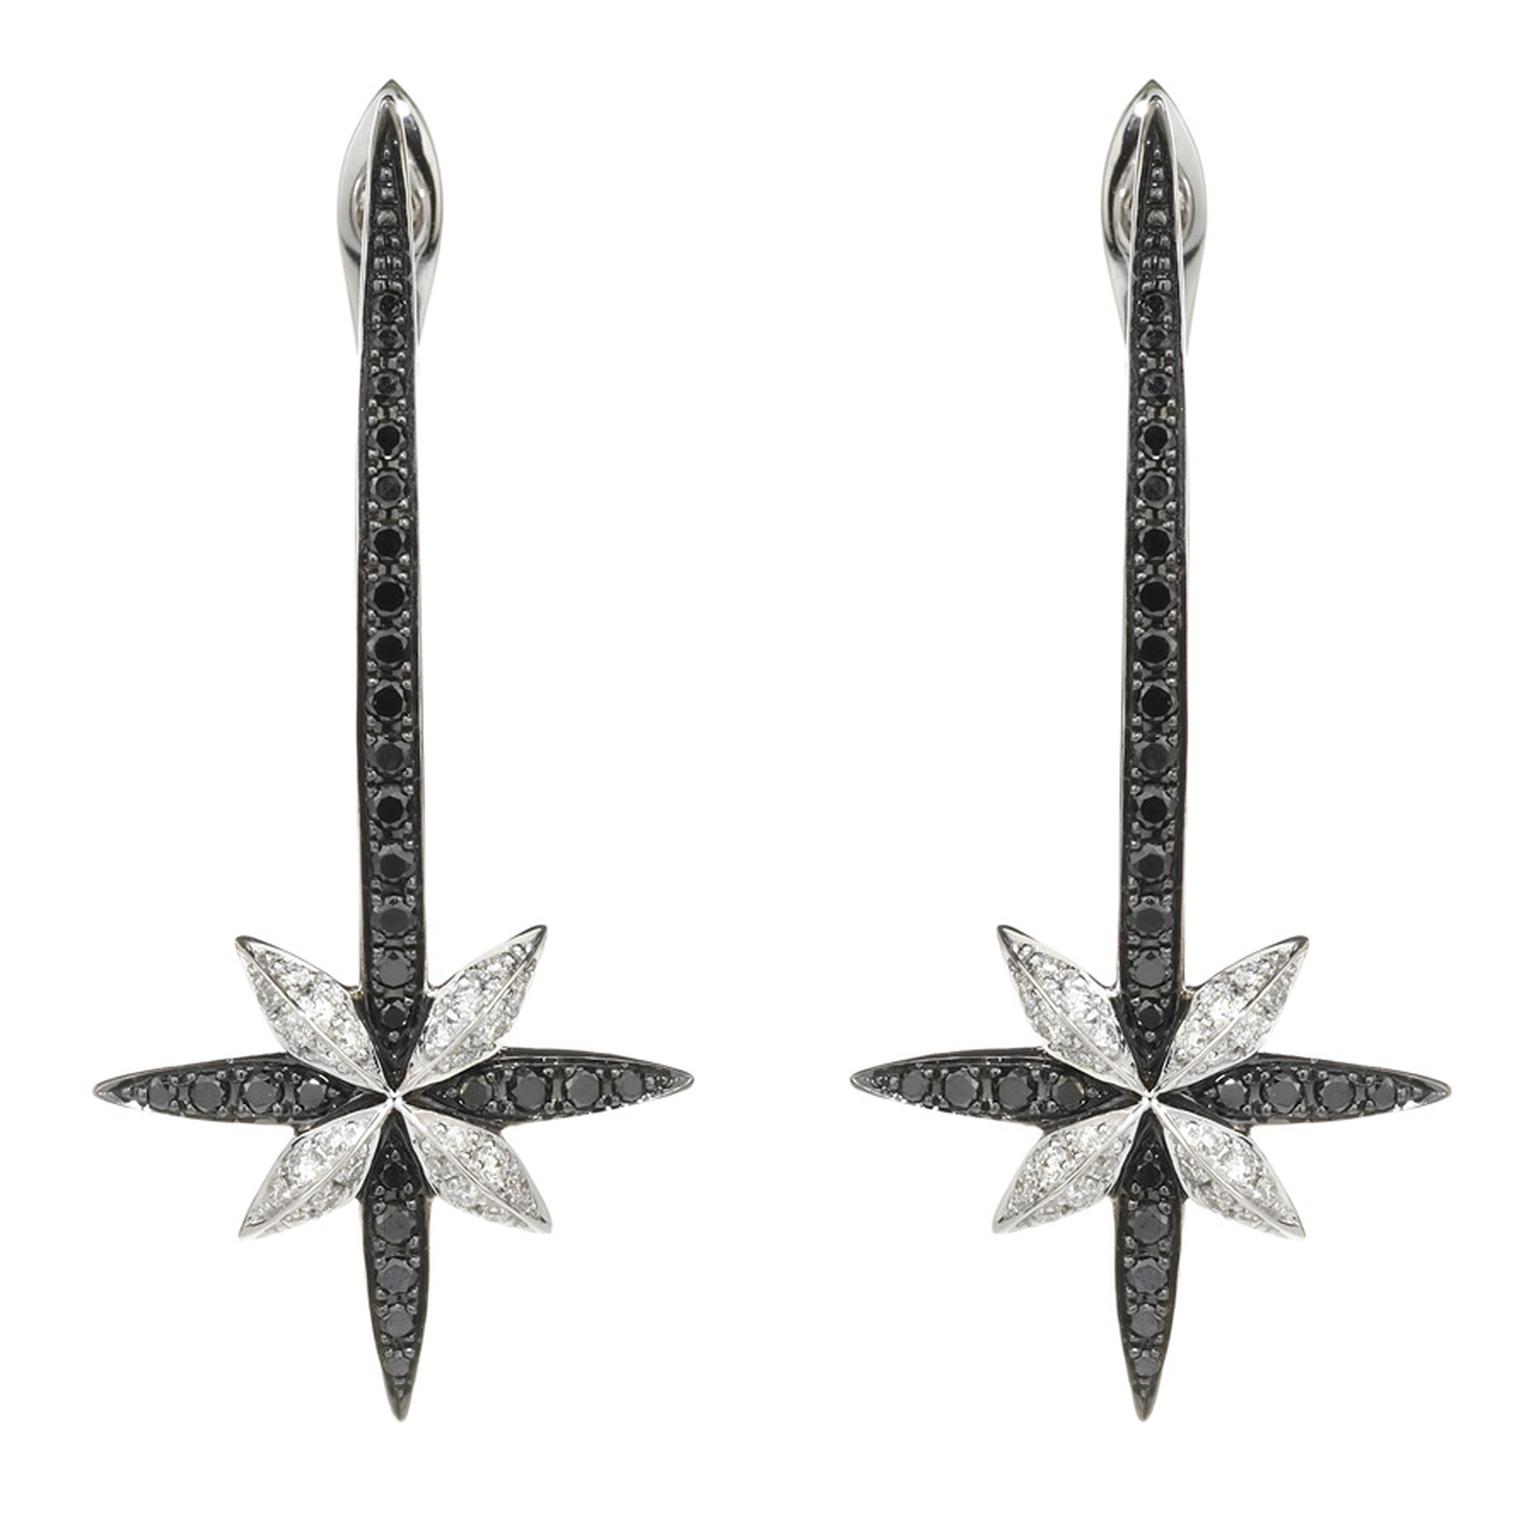 Stephen Webster. Murder She Wrote Couture Cross Earrings